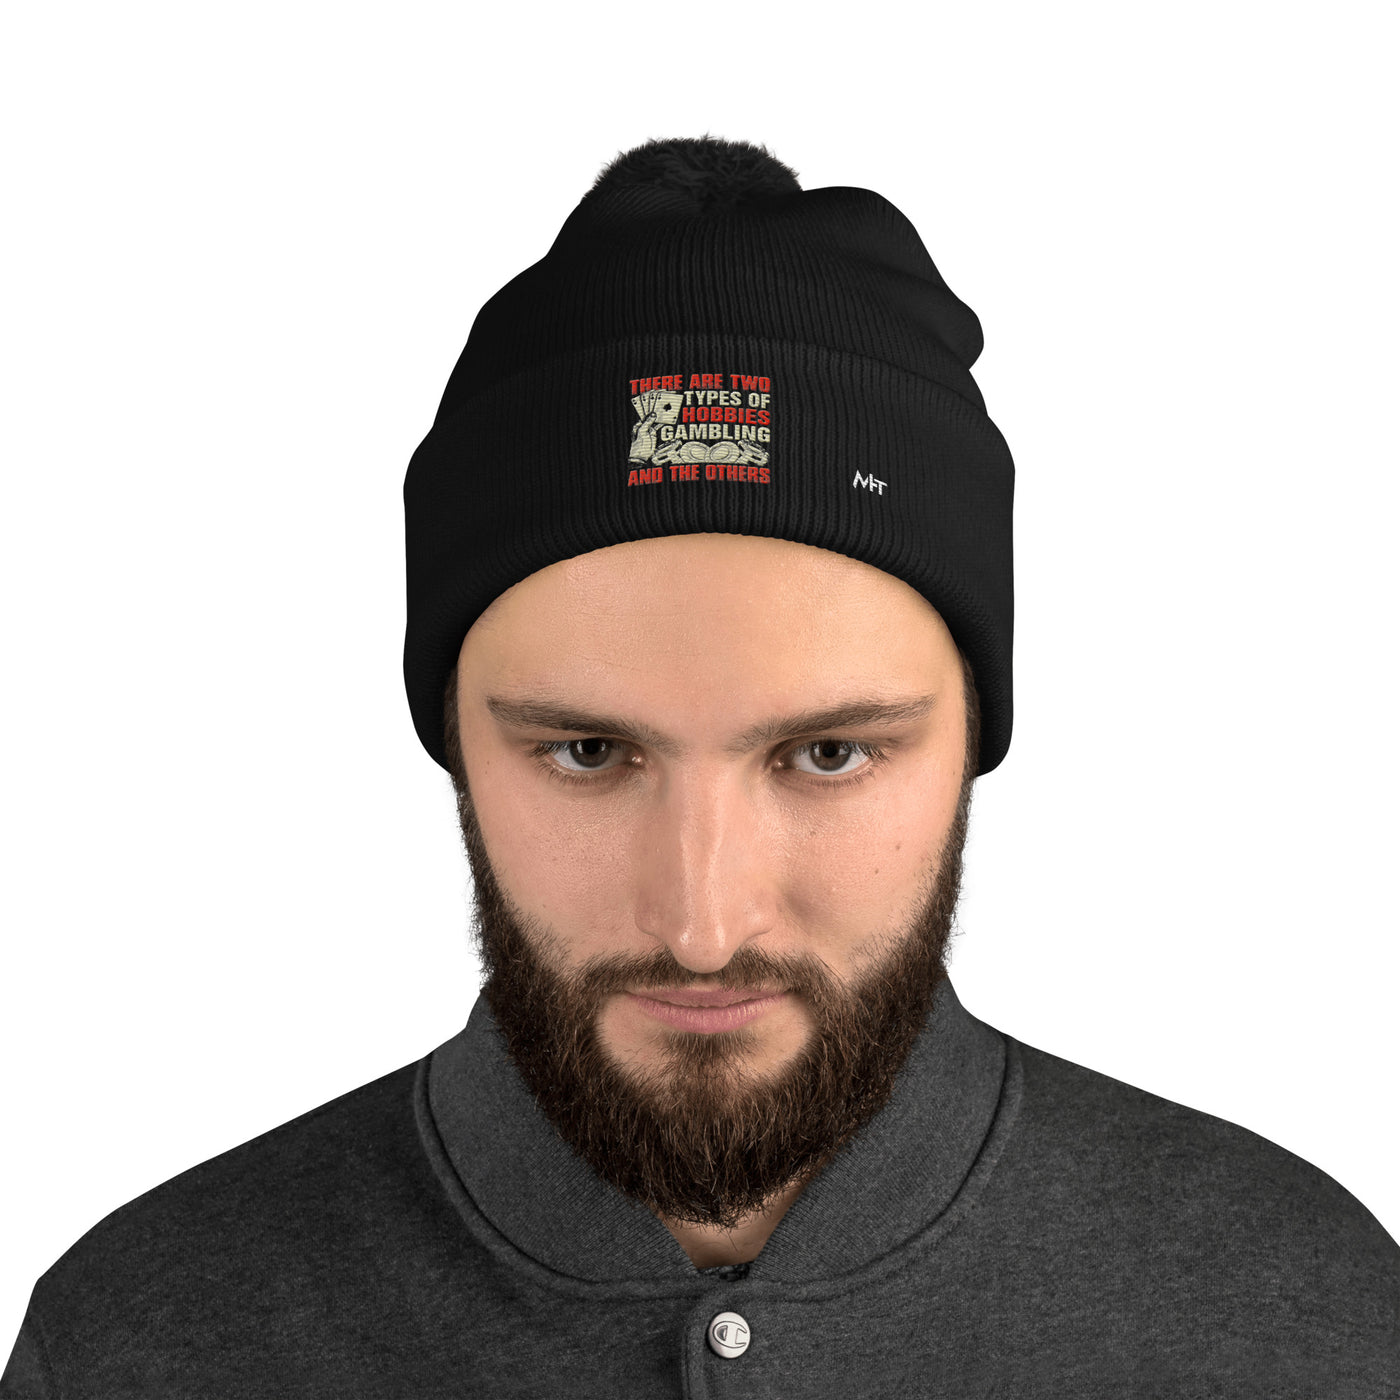 There Are two types of Hobbies; Gambling and the others - Pom-Pom Beanie